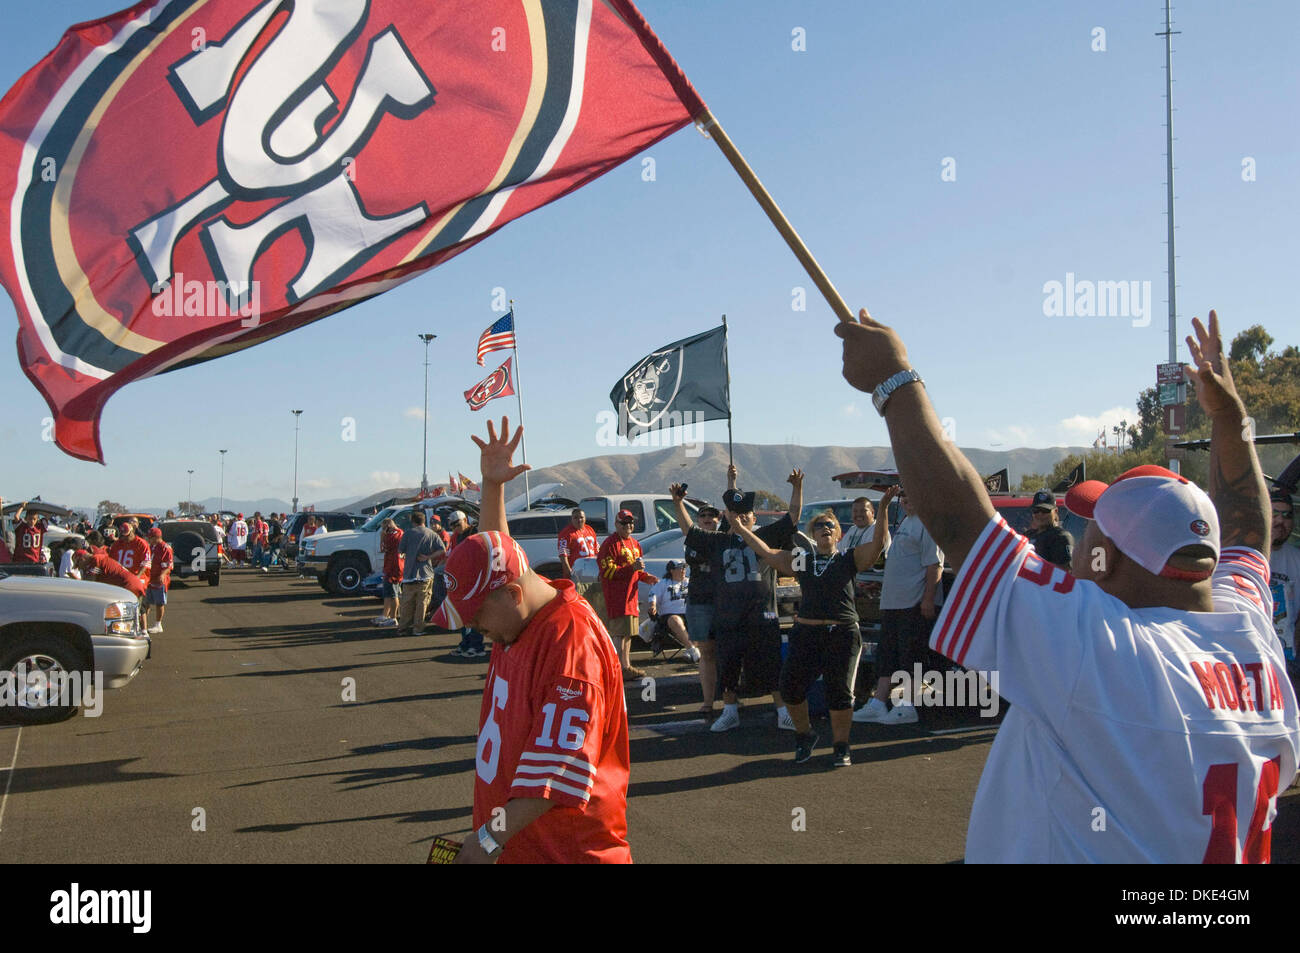 Aug.18, 2007 - San Francisco, California, U.S. - San Francisco 49ers vs Oakland Raiders at Bill Walsh field. Tailgate activities in parking lot before game.  Taunting each other with words and flag bay are fans are vocal. (Credit: © Al Golub/ZUMApress.com) Stock Photo